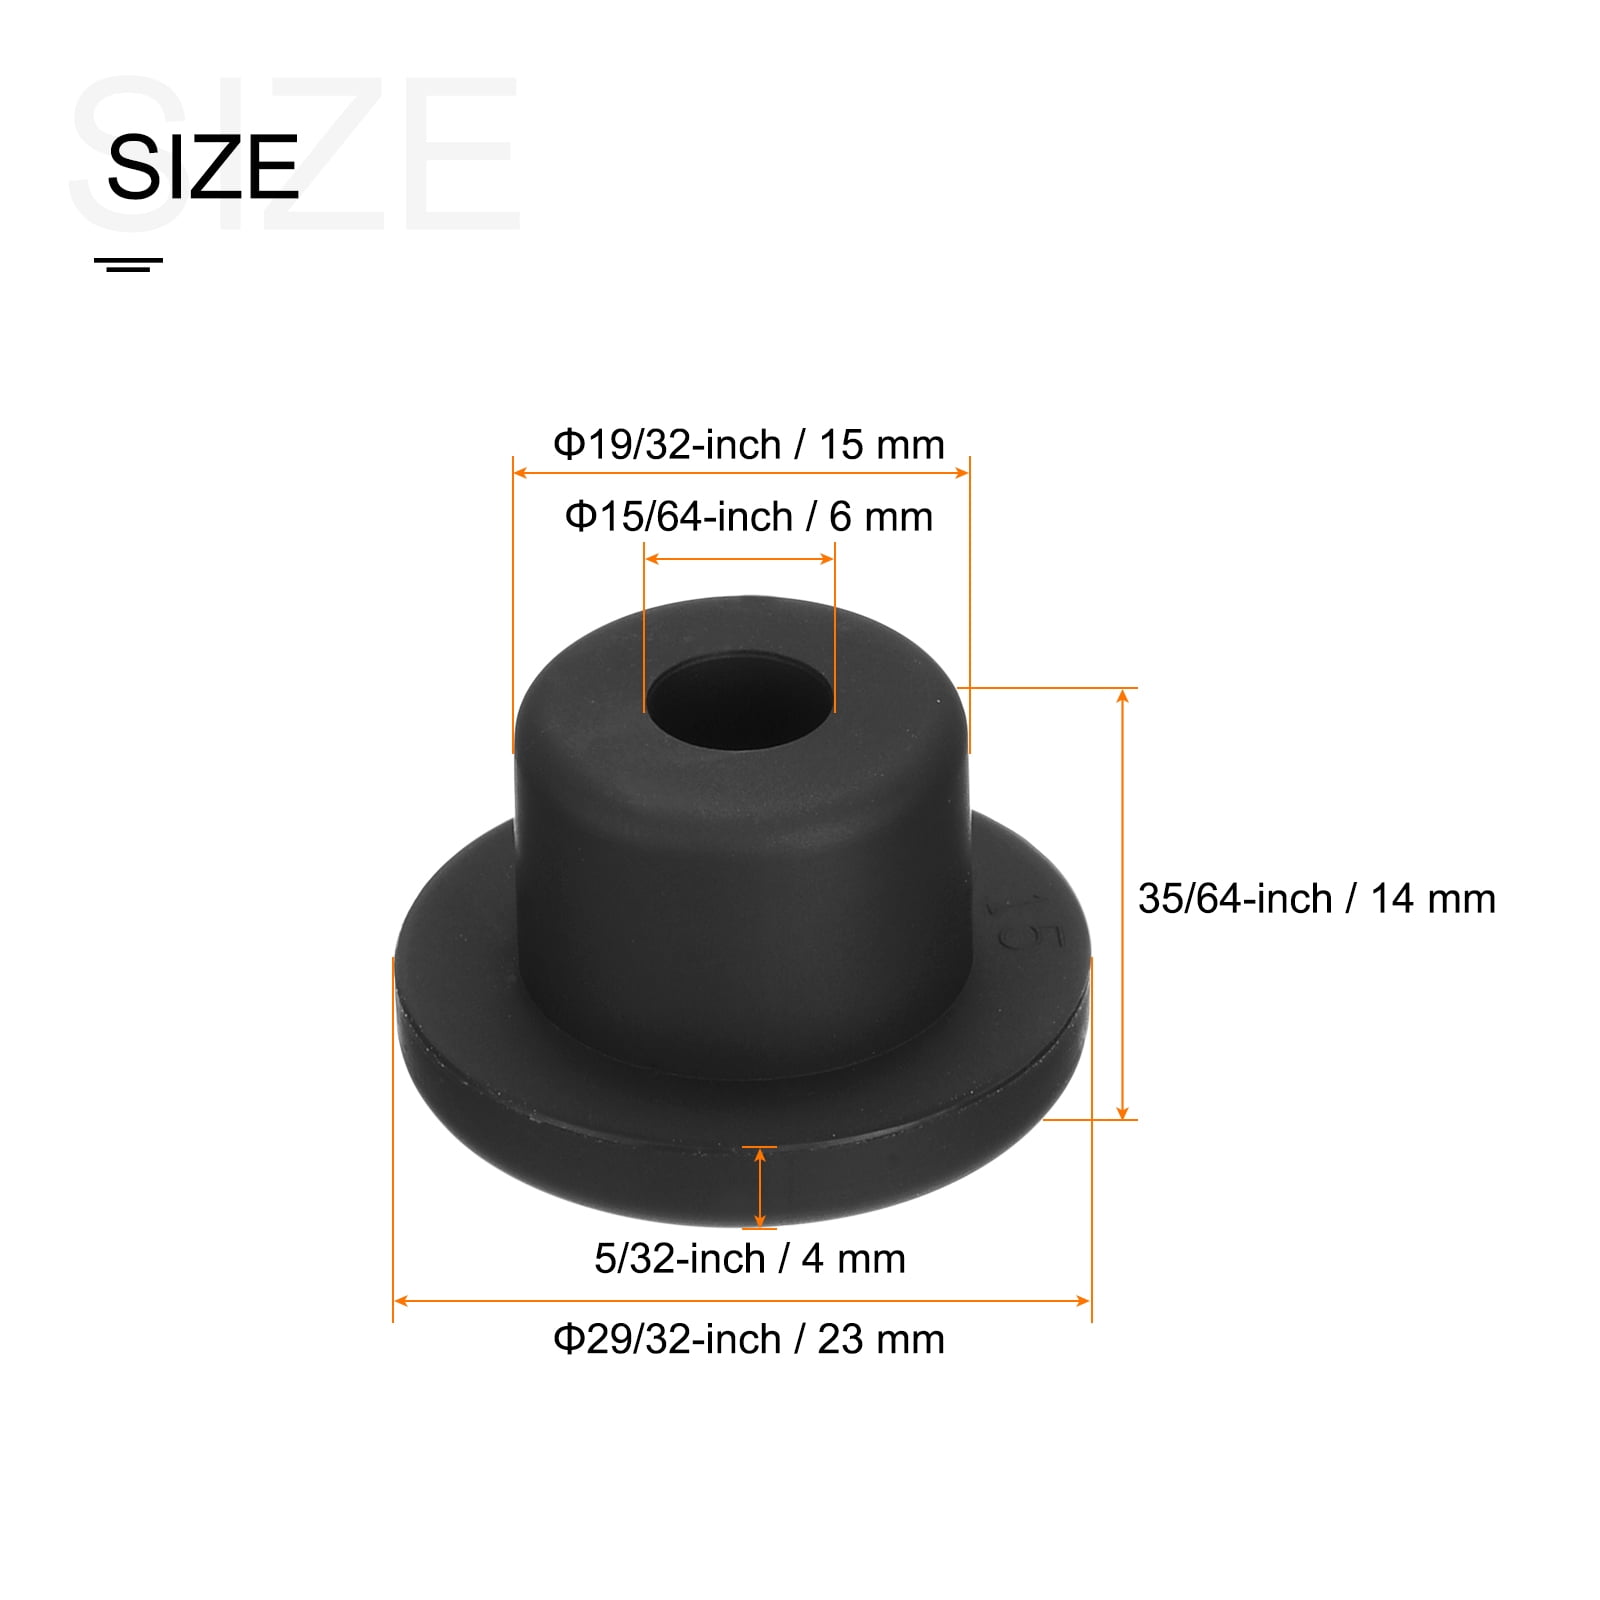 Flexible Rubber Grommet .5'' Reducer to .375'' ID Wall Plate Hole